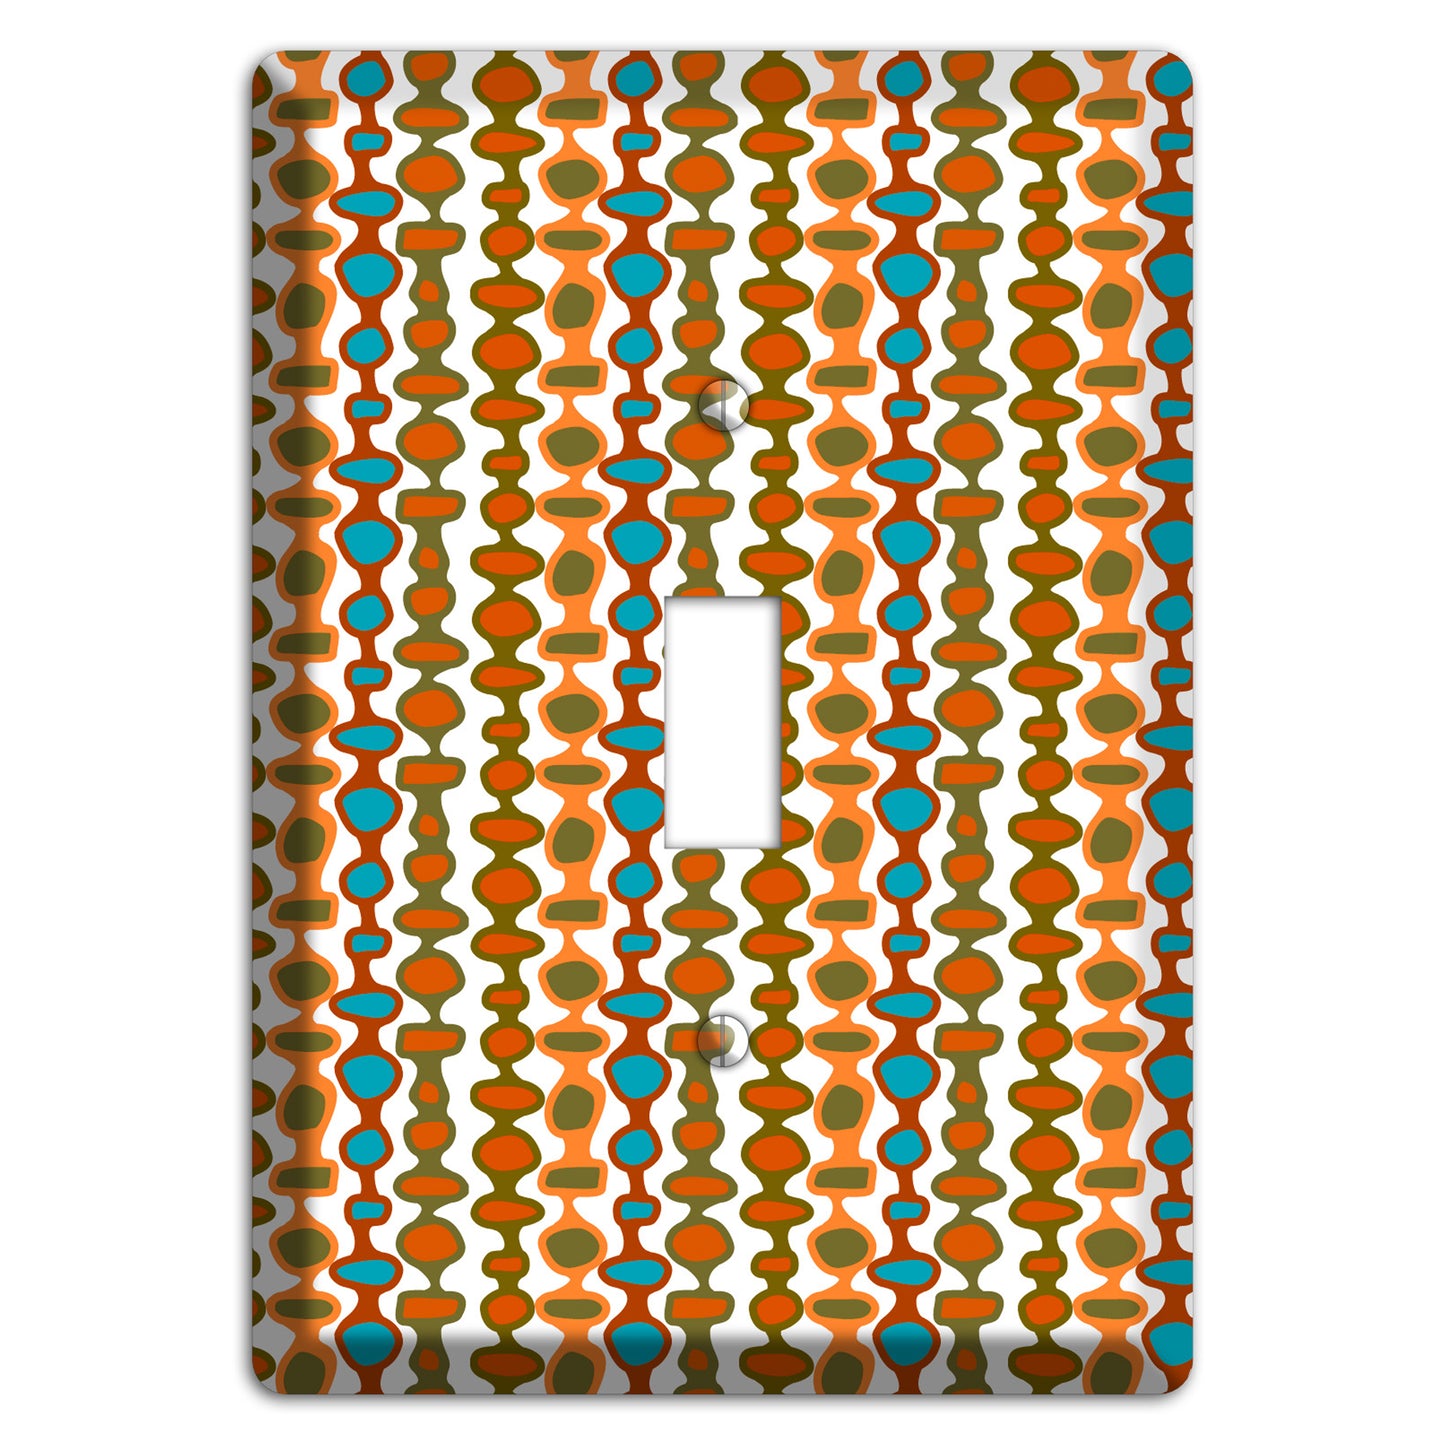 Multi Umber and Dusty Blue Bead and Reel Cover Plates